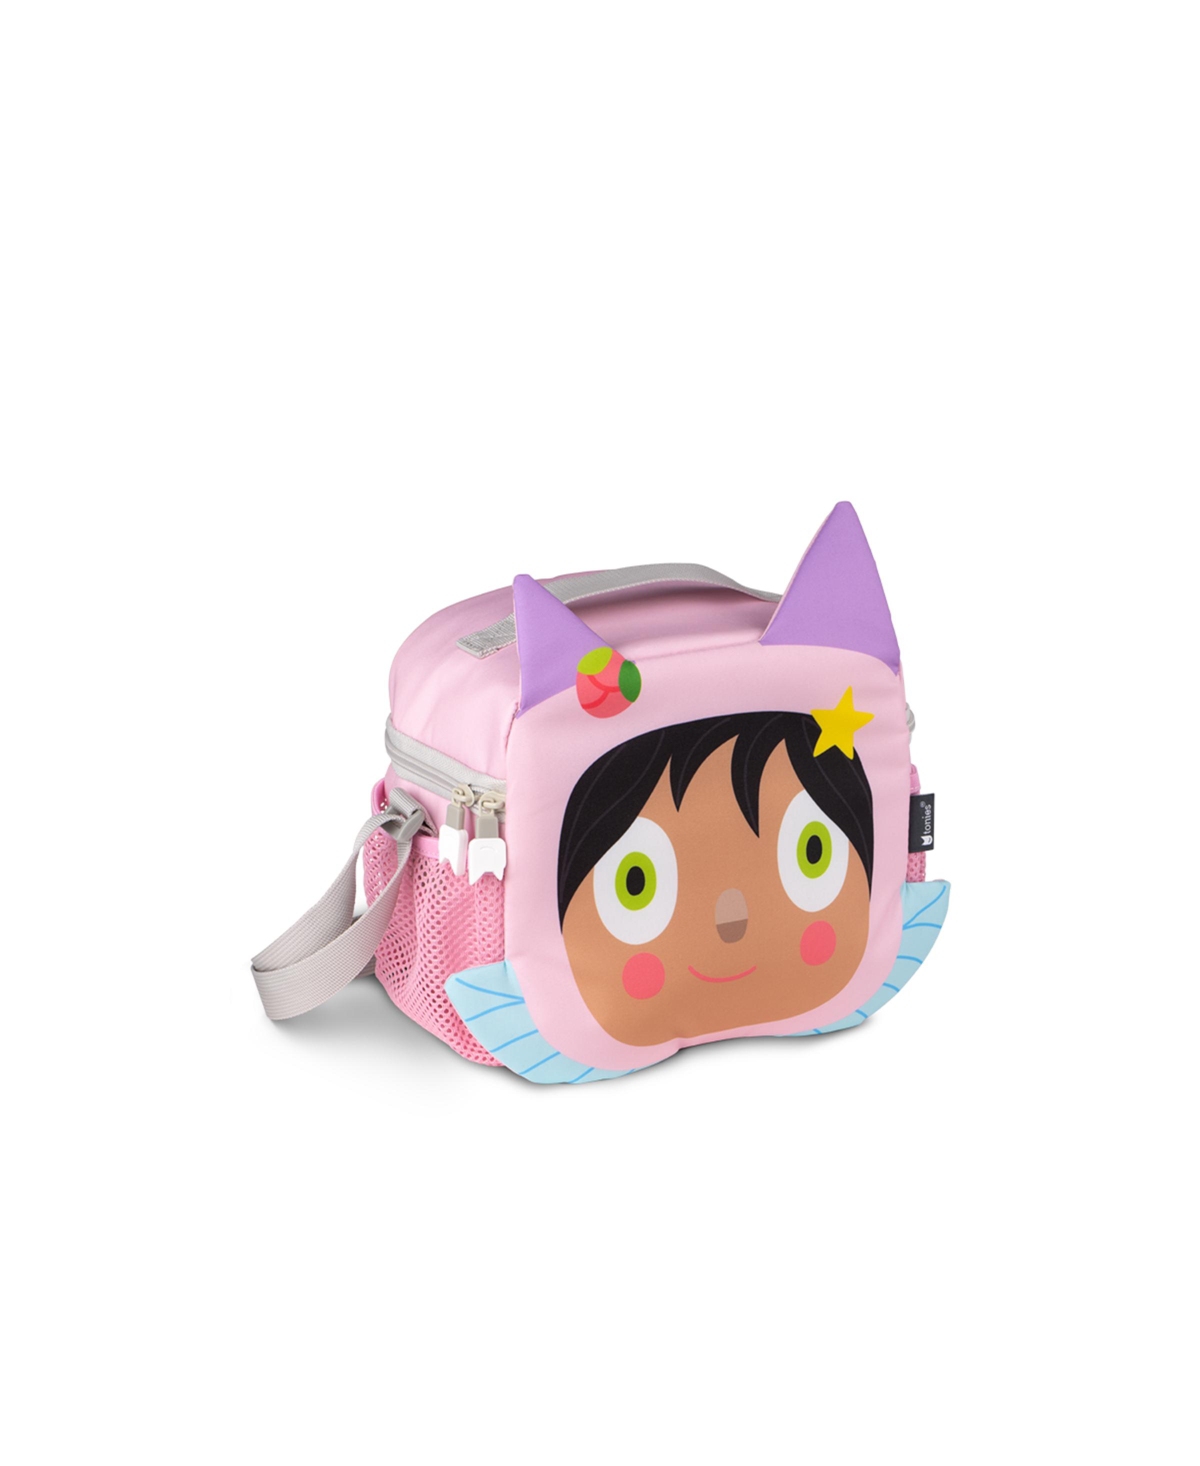 Tonies Kids' Fairy Carry Case In No Color